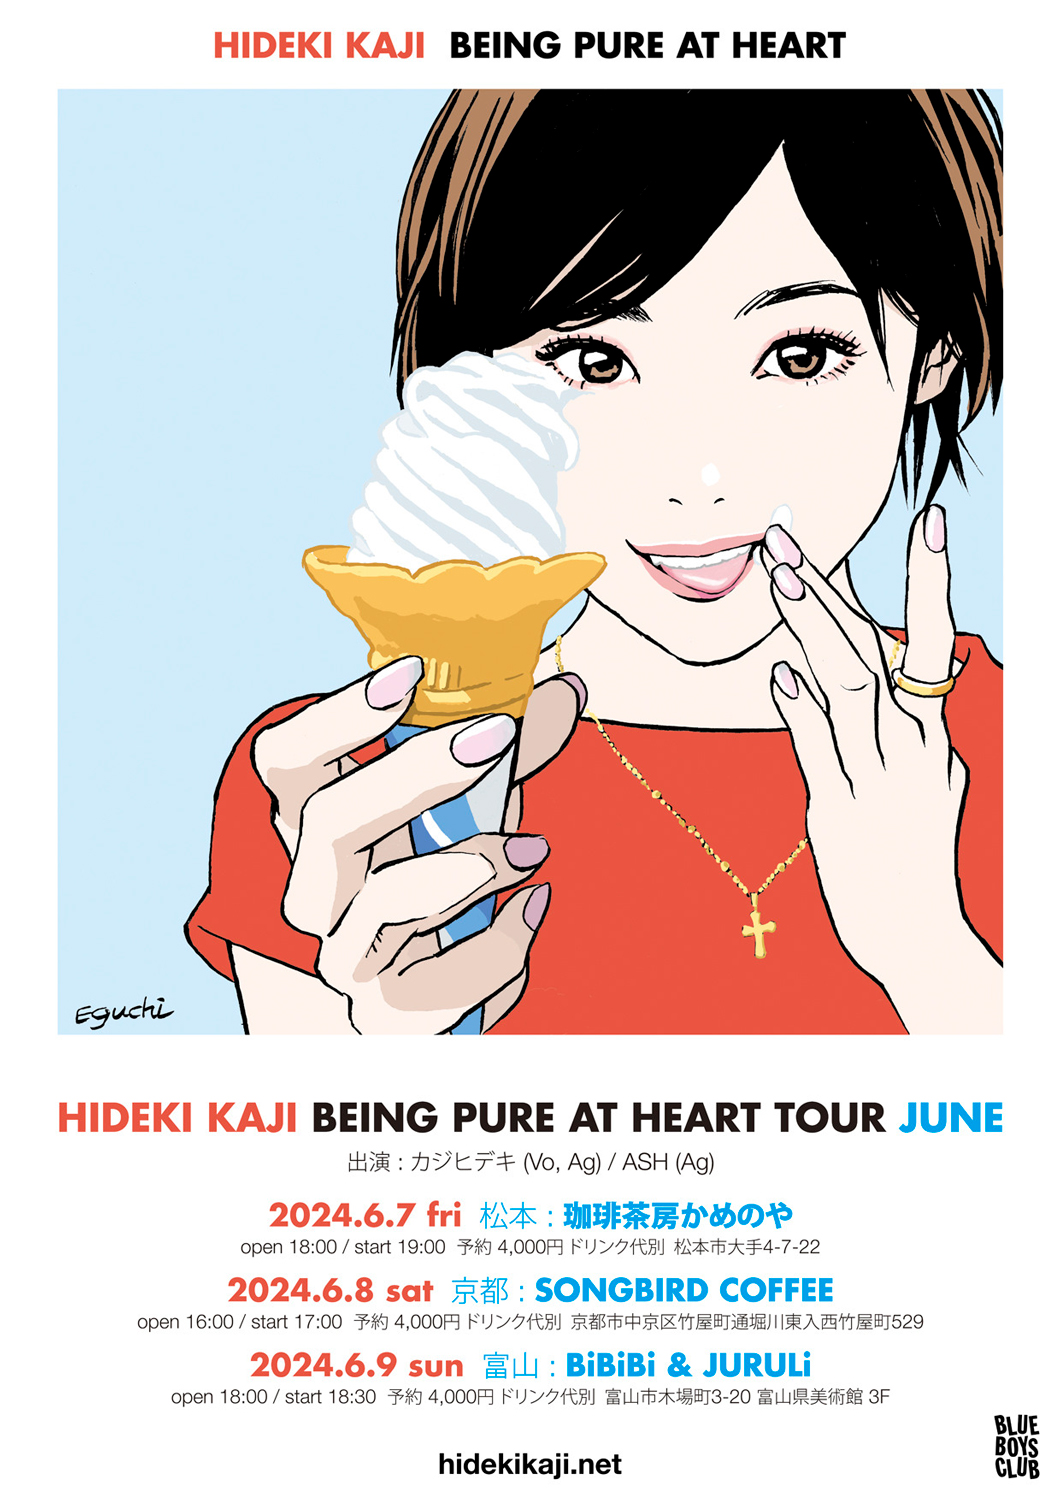 「BEING PURE AT HEART TOUR JUNE」